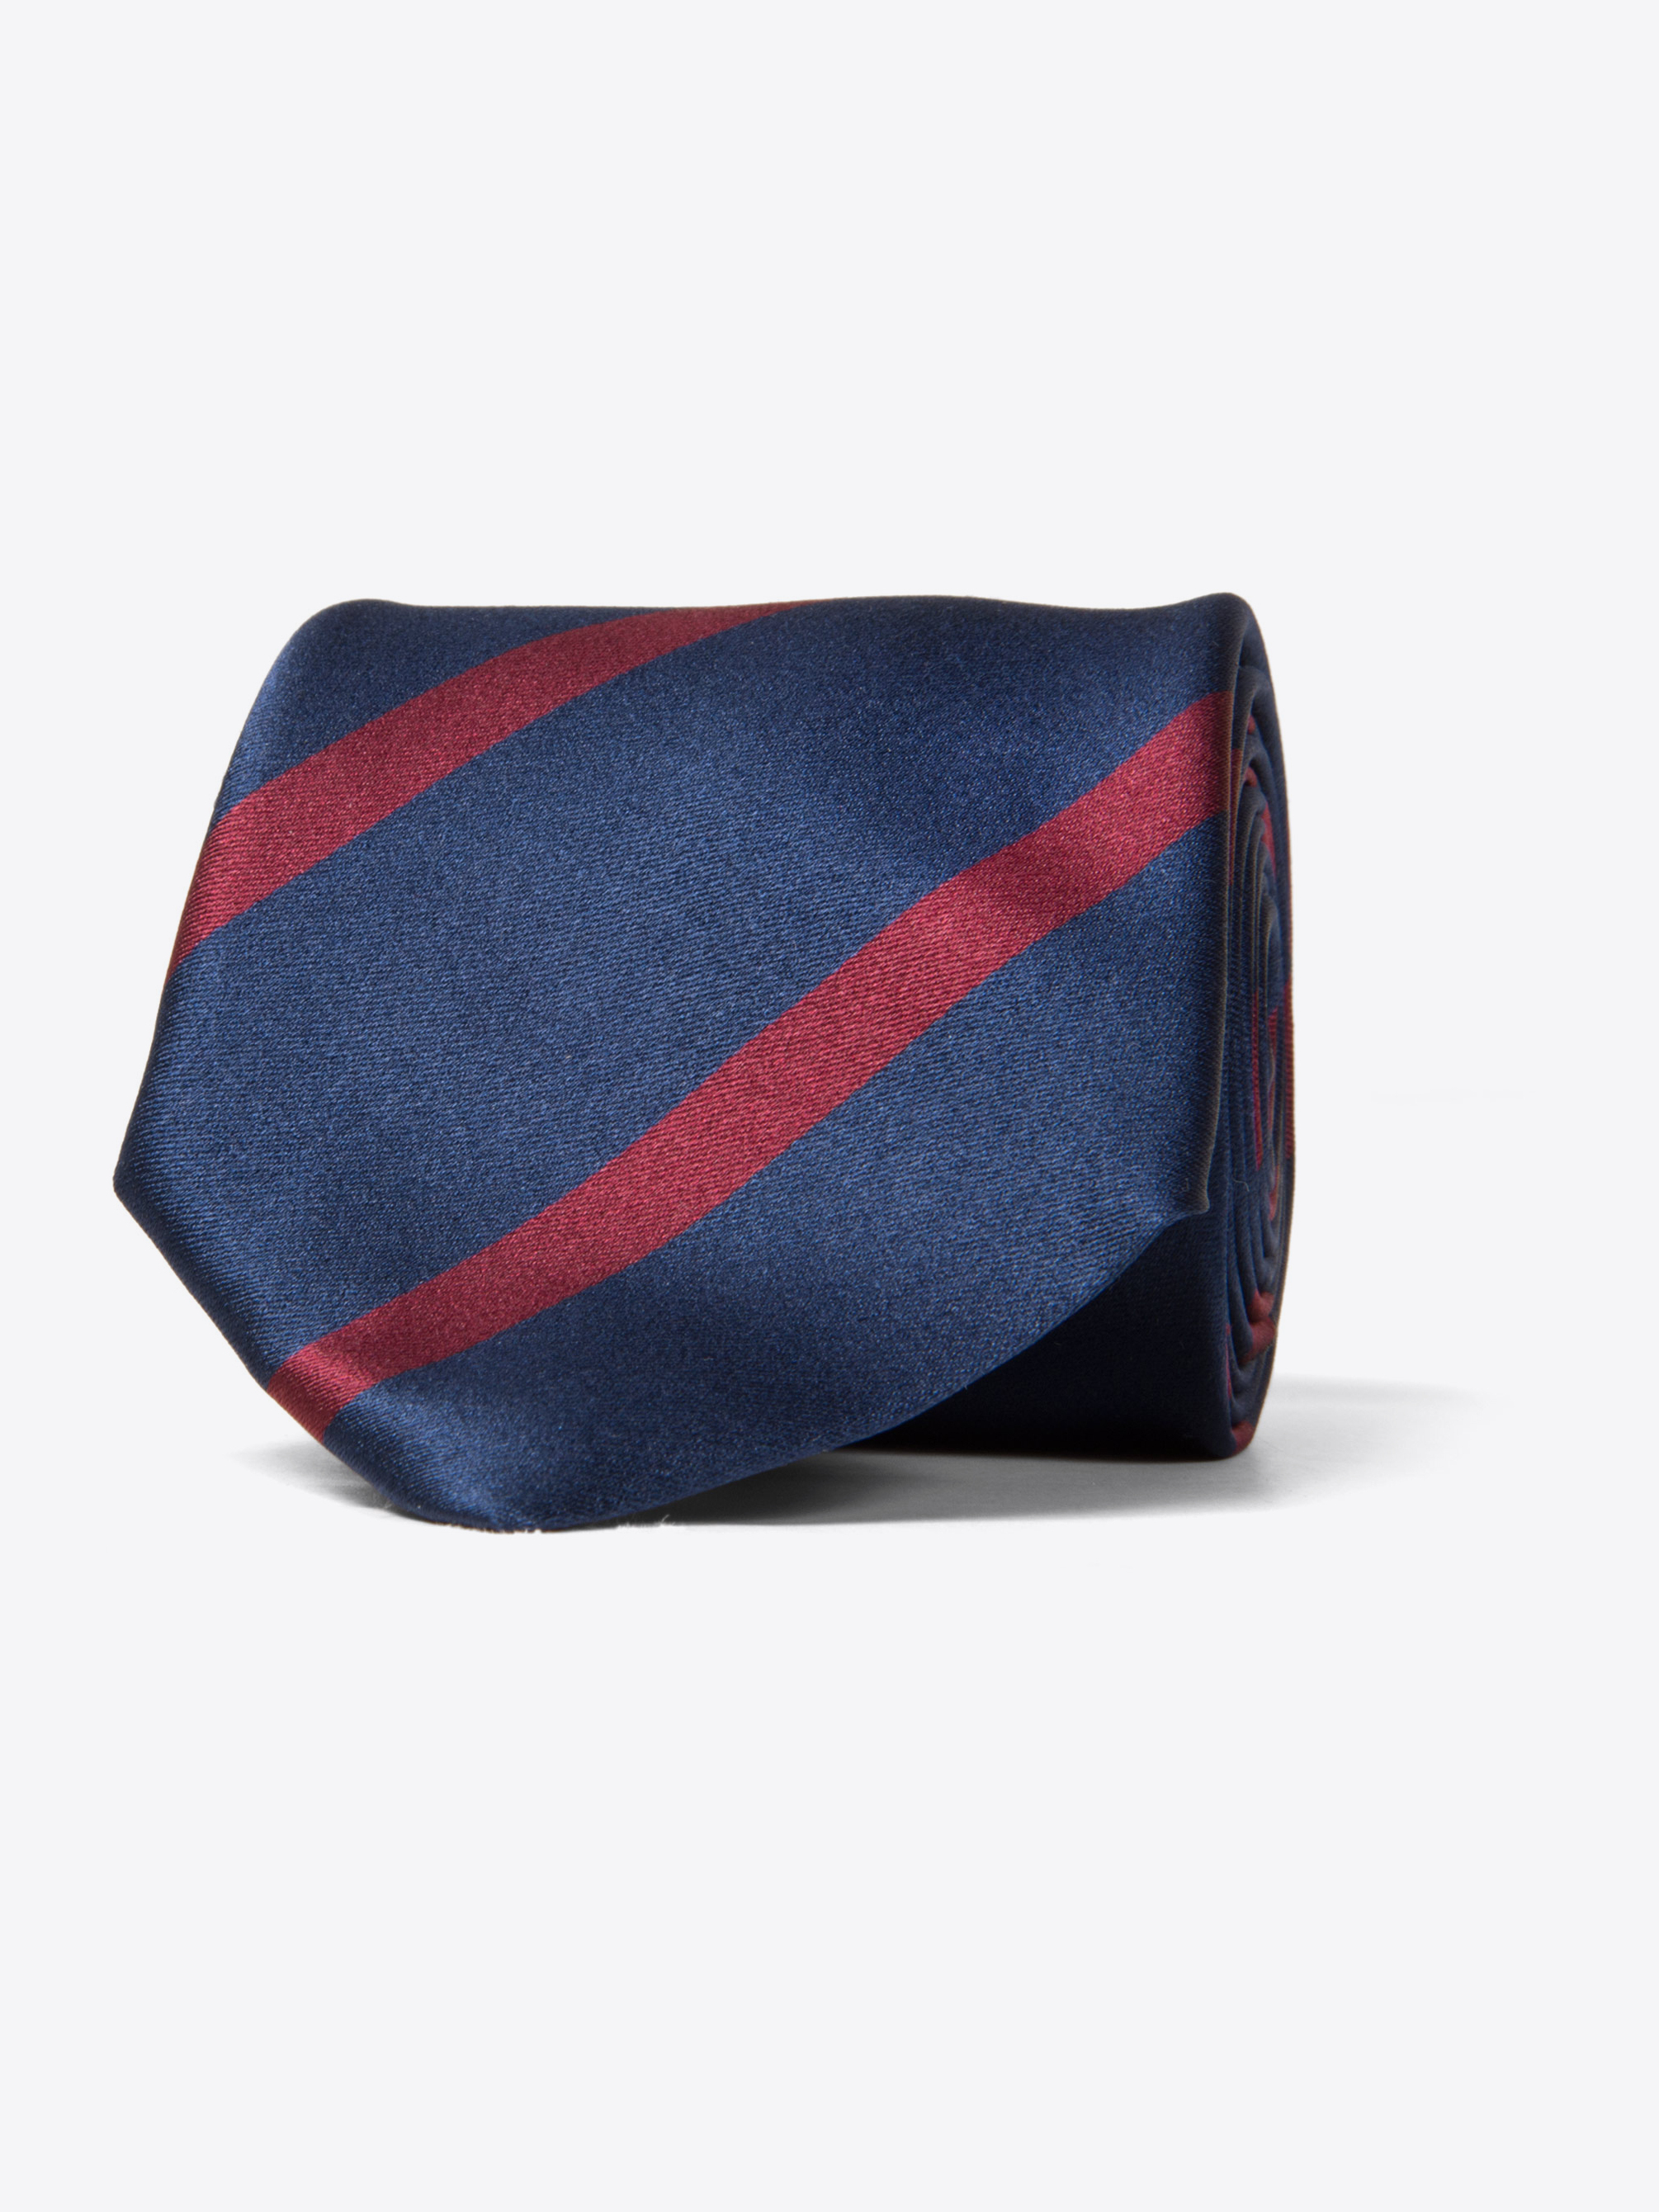 Zoom Image of Navy and Red Silk Striped Tie